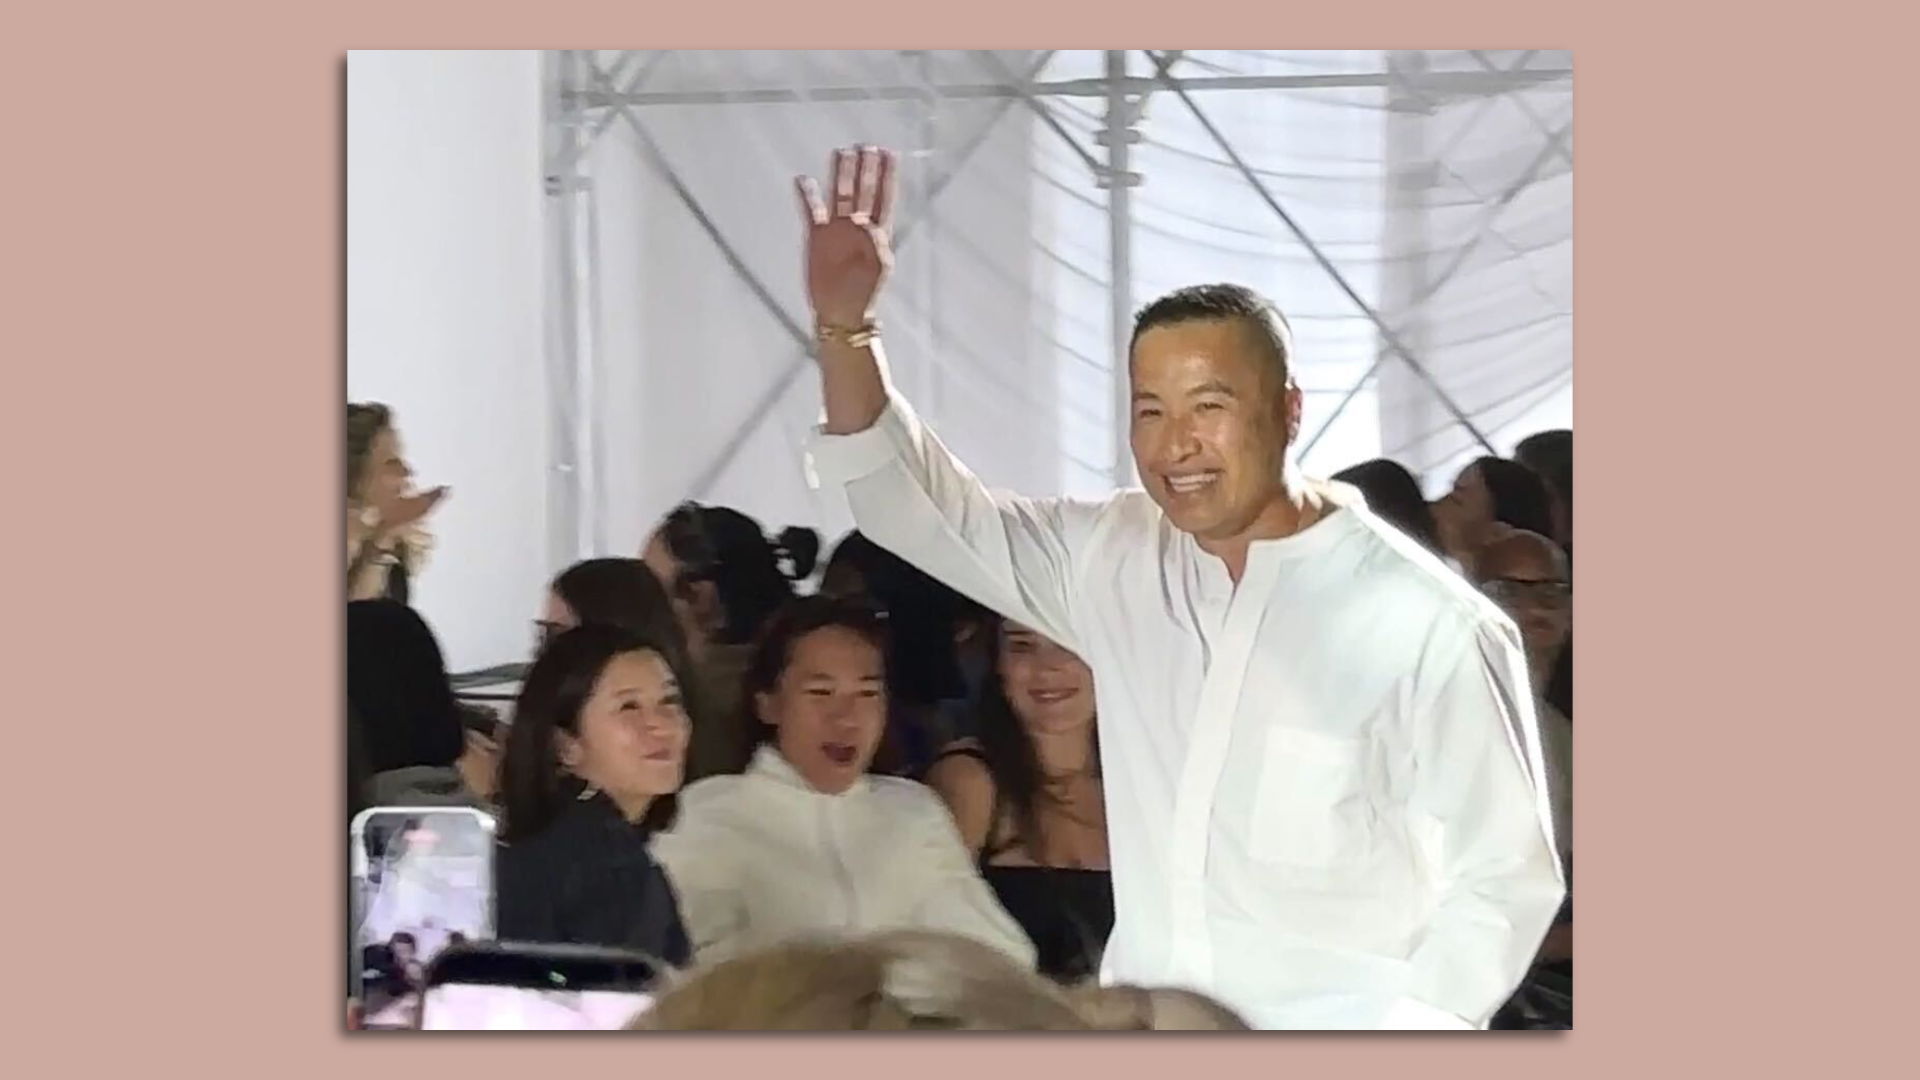 photo of a man wearing a white shirt waving to a crowd at New York Fashion Week